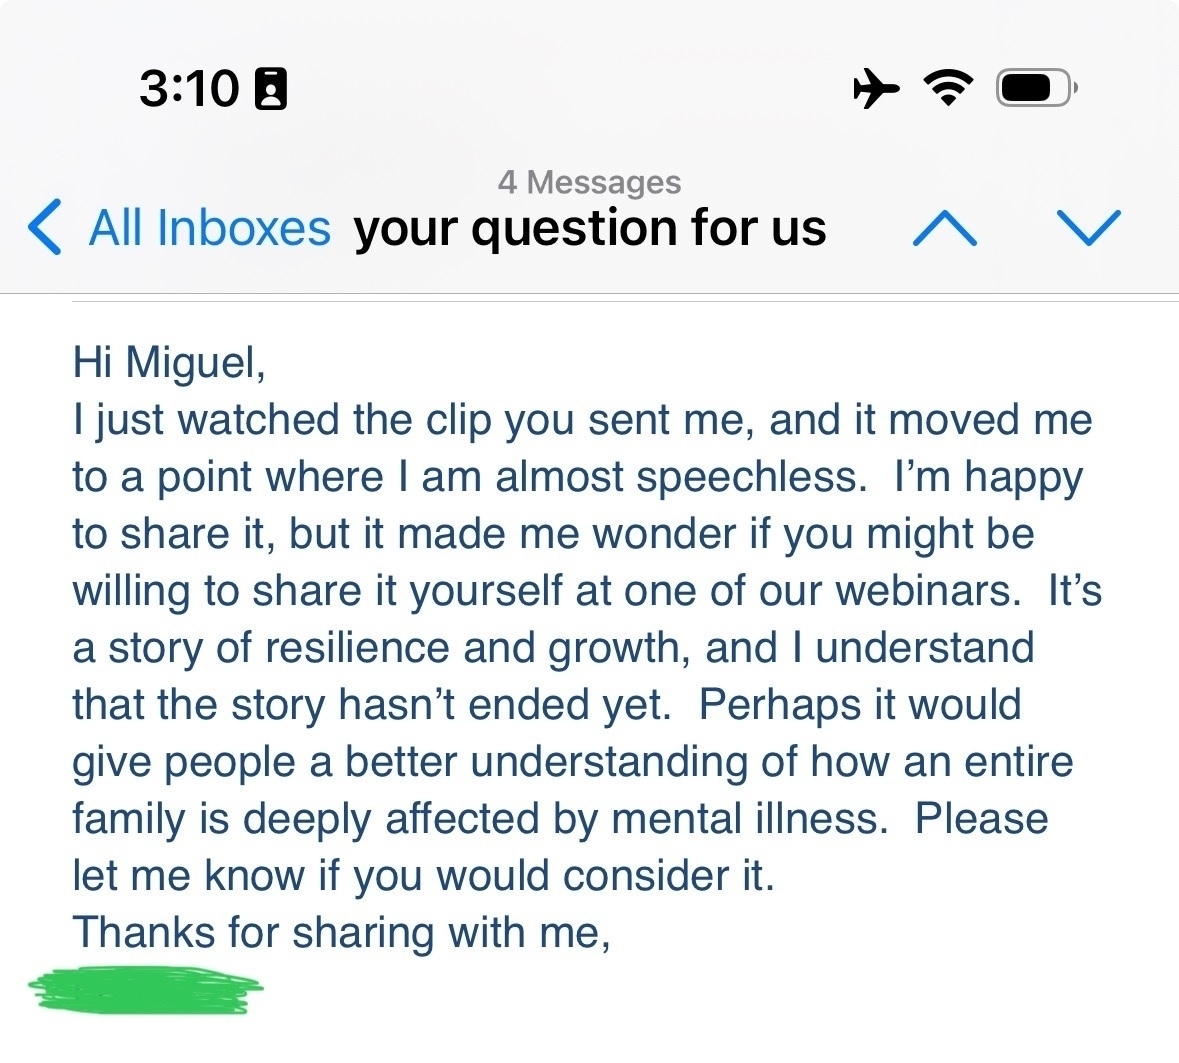 All Inboxes your question for us&10;^&10;Hi Miguel,&10;I just watched the clip you sent me, and it moved me to a point where I am almost speechless. I'm happy to share it, but it made me wonder if you might be willing to share it yourself at one of our webinars. It's a story of resilience and growth, and I understand that the story hasn't ended yet. Perhaps it would give people a better understanding of how an entire family is deeply affected by mental illness. Please let me know if you would consider it.&10;Thanks for sharing with me,